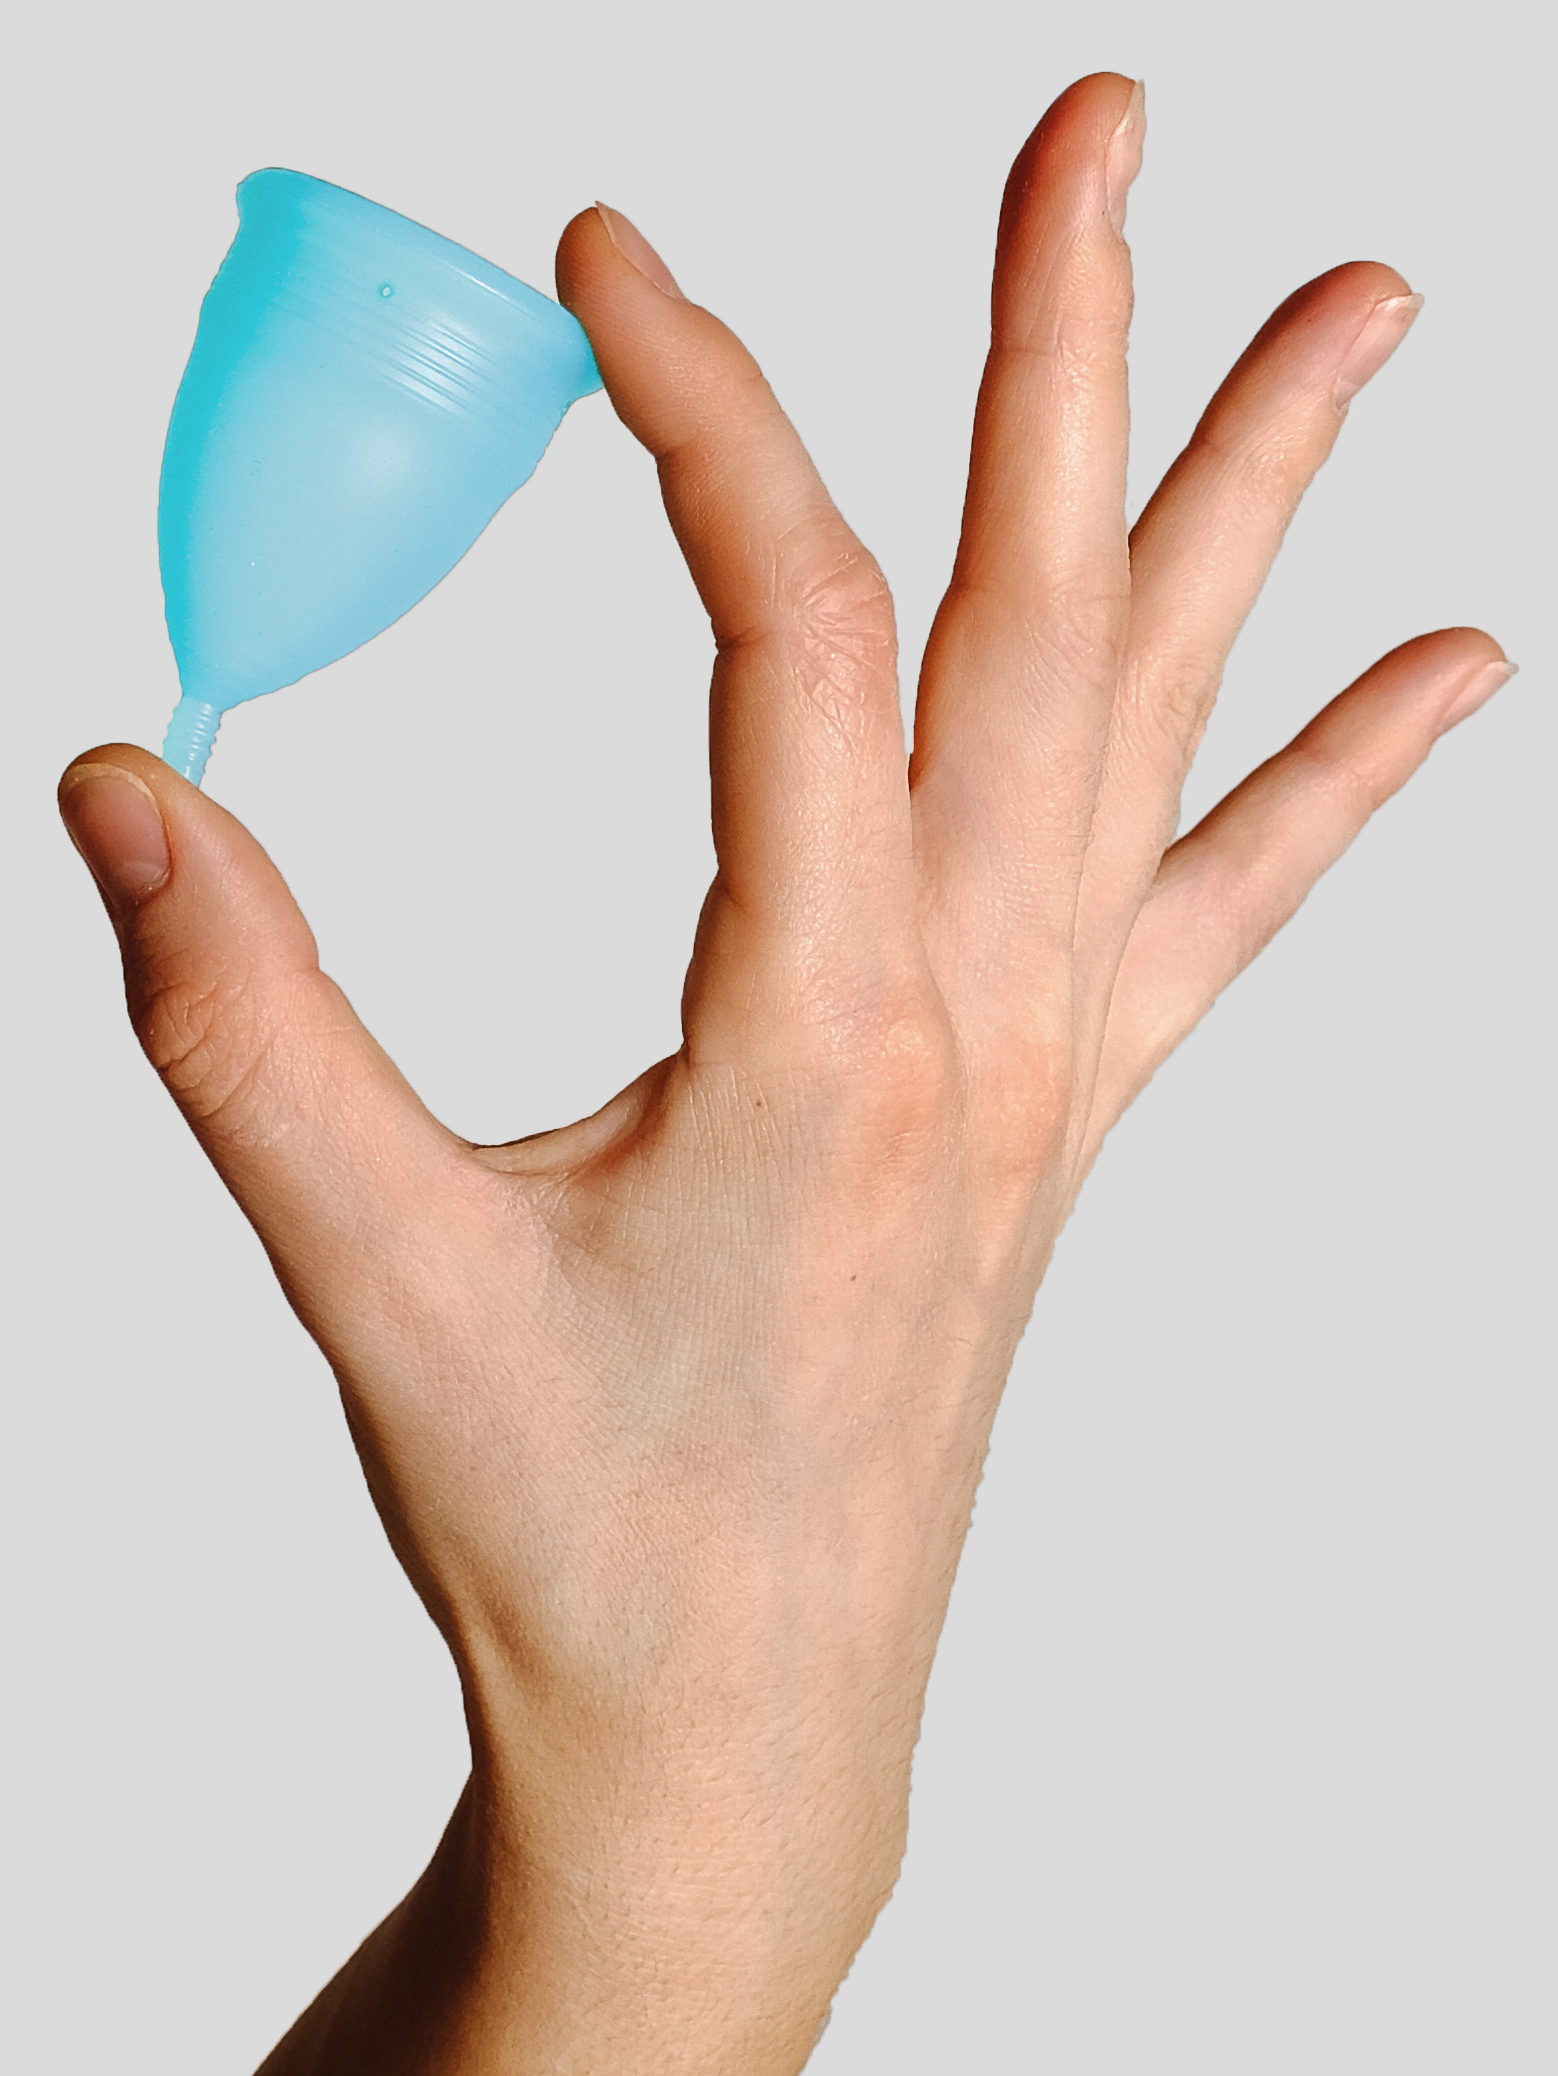 person holding a light blue menstrual cup between their index finger and thumb